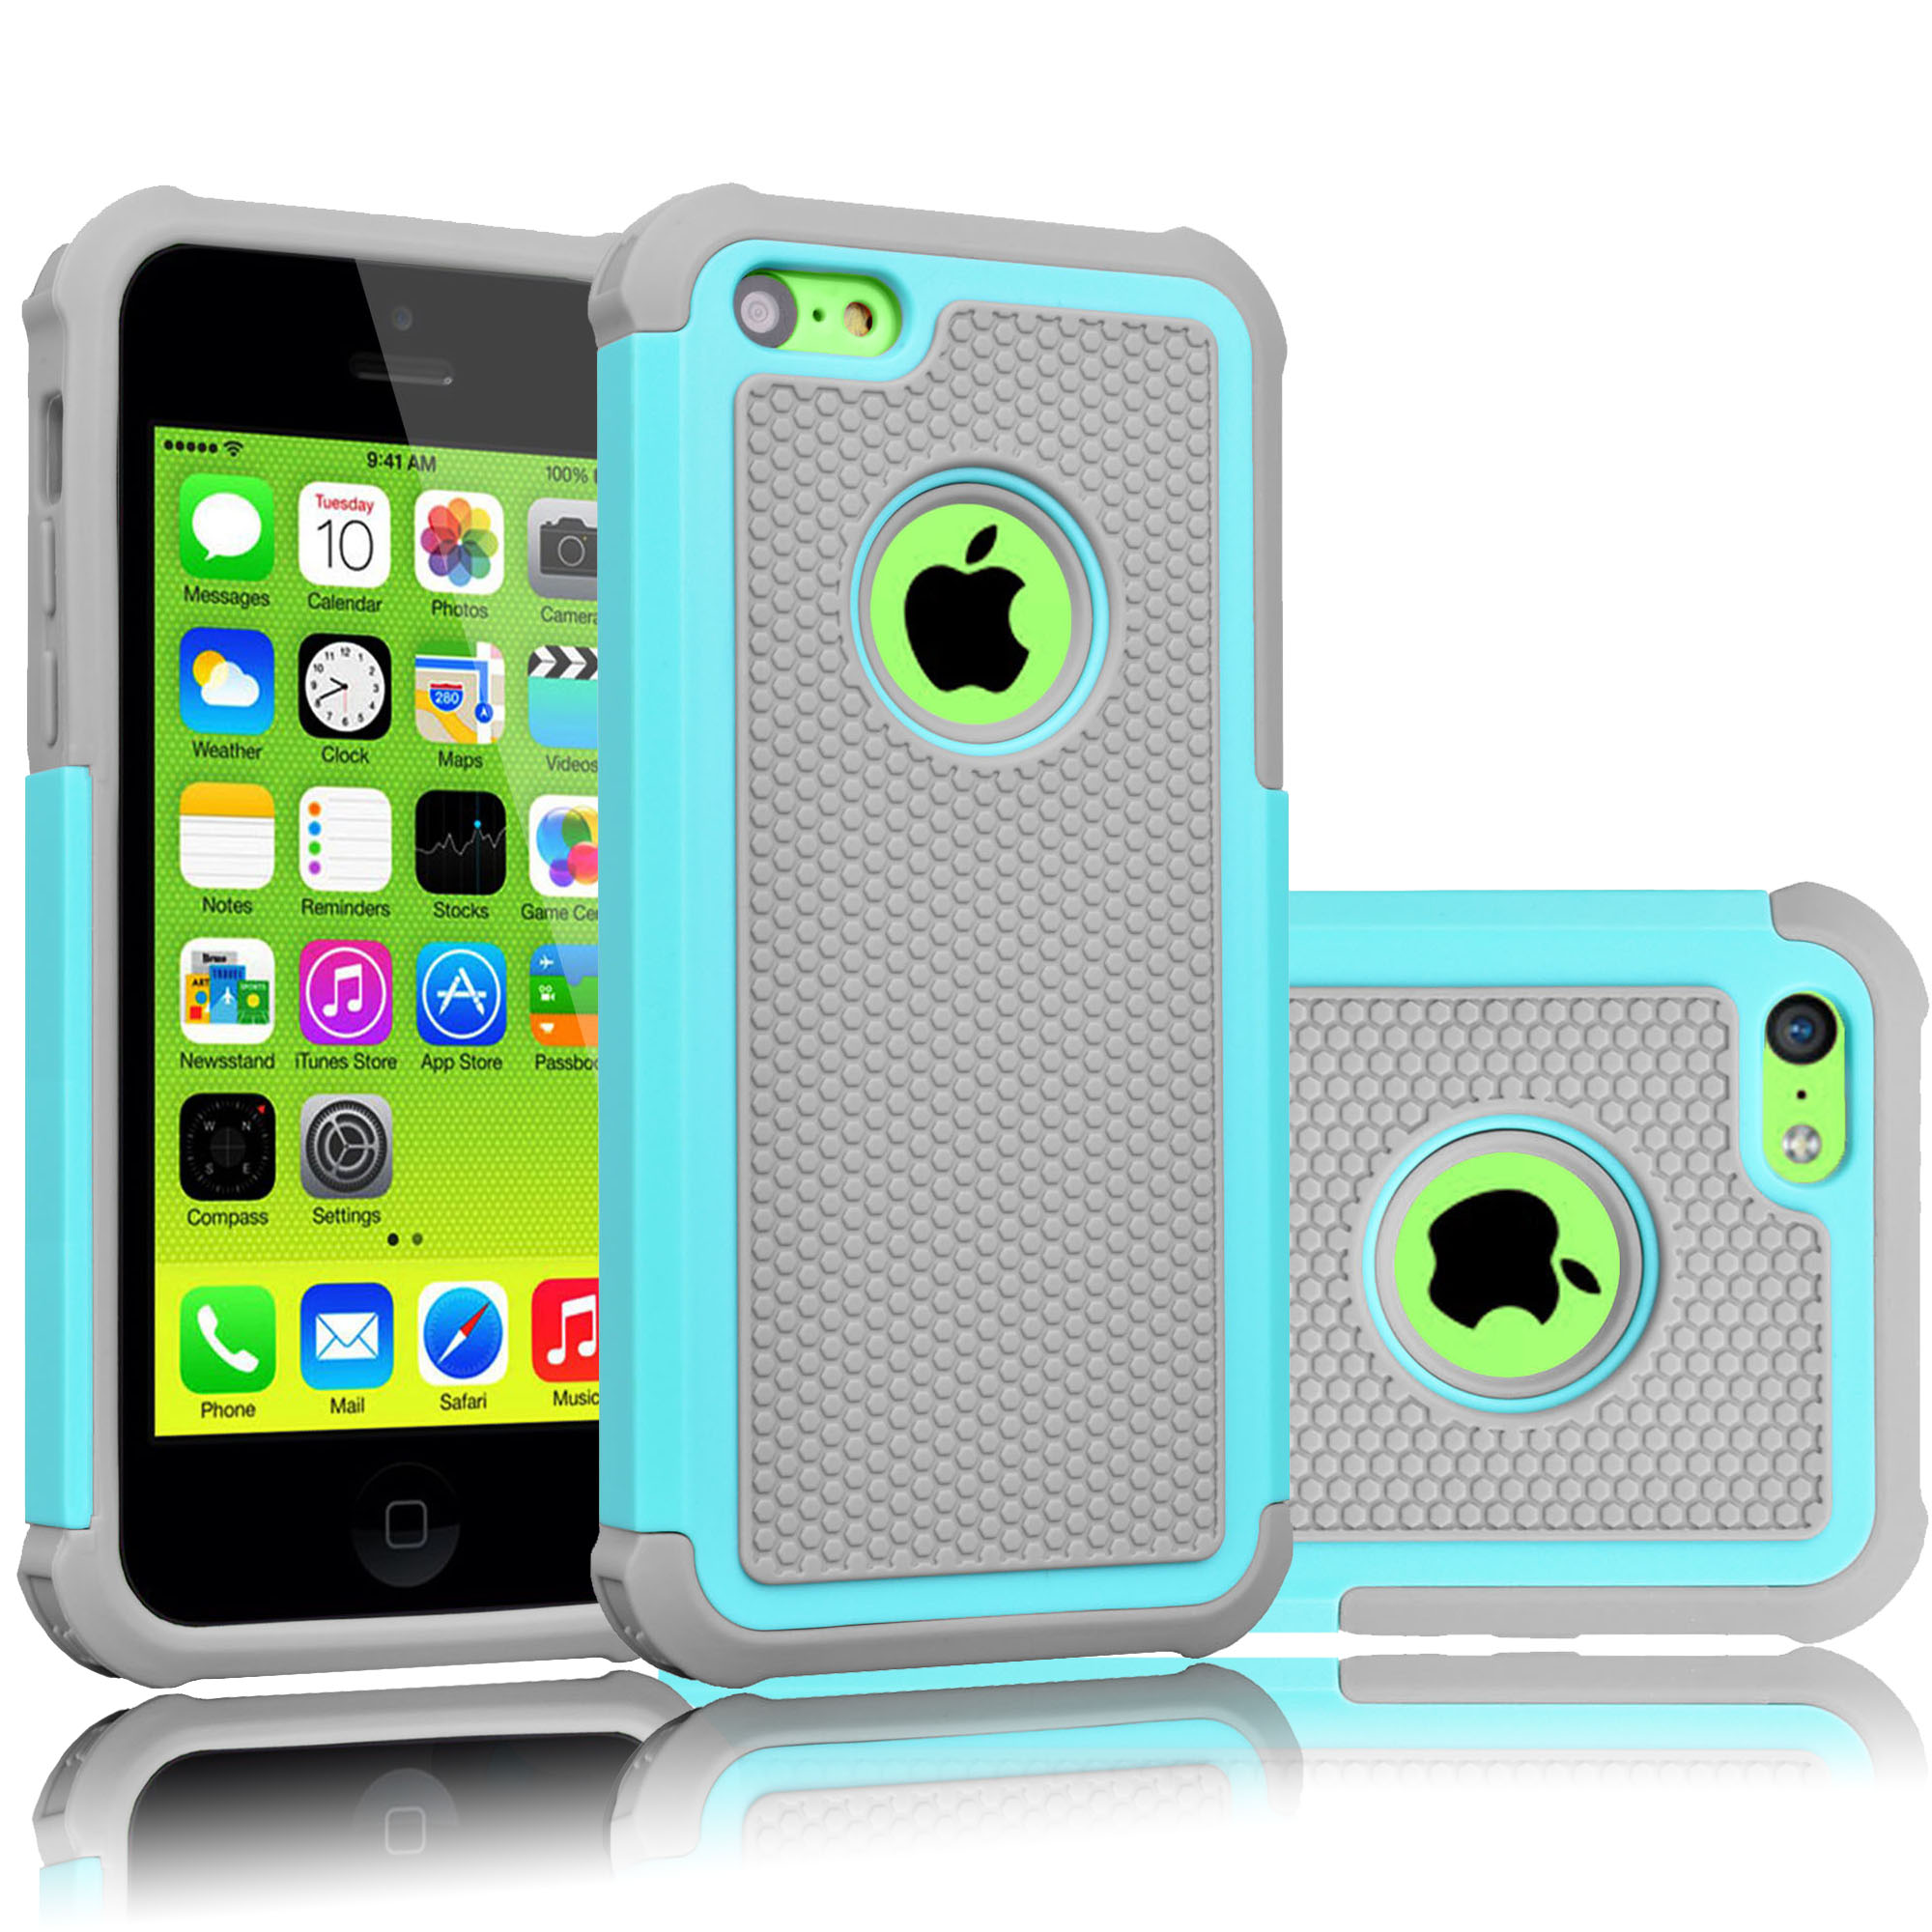 iPhone 5C Case, Tekcoo(TM) [Tmajor Series] [Turquoise/Grey] Shock Absorbing Hybrid Impact Defender Rugged Slim Case Cover Shell For Apple iPhone 5C Hard Plastic Outer + Rubber Silicone Inner - image 1 of 4